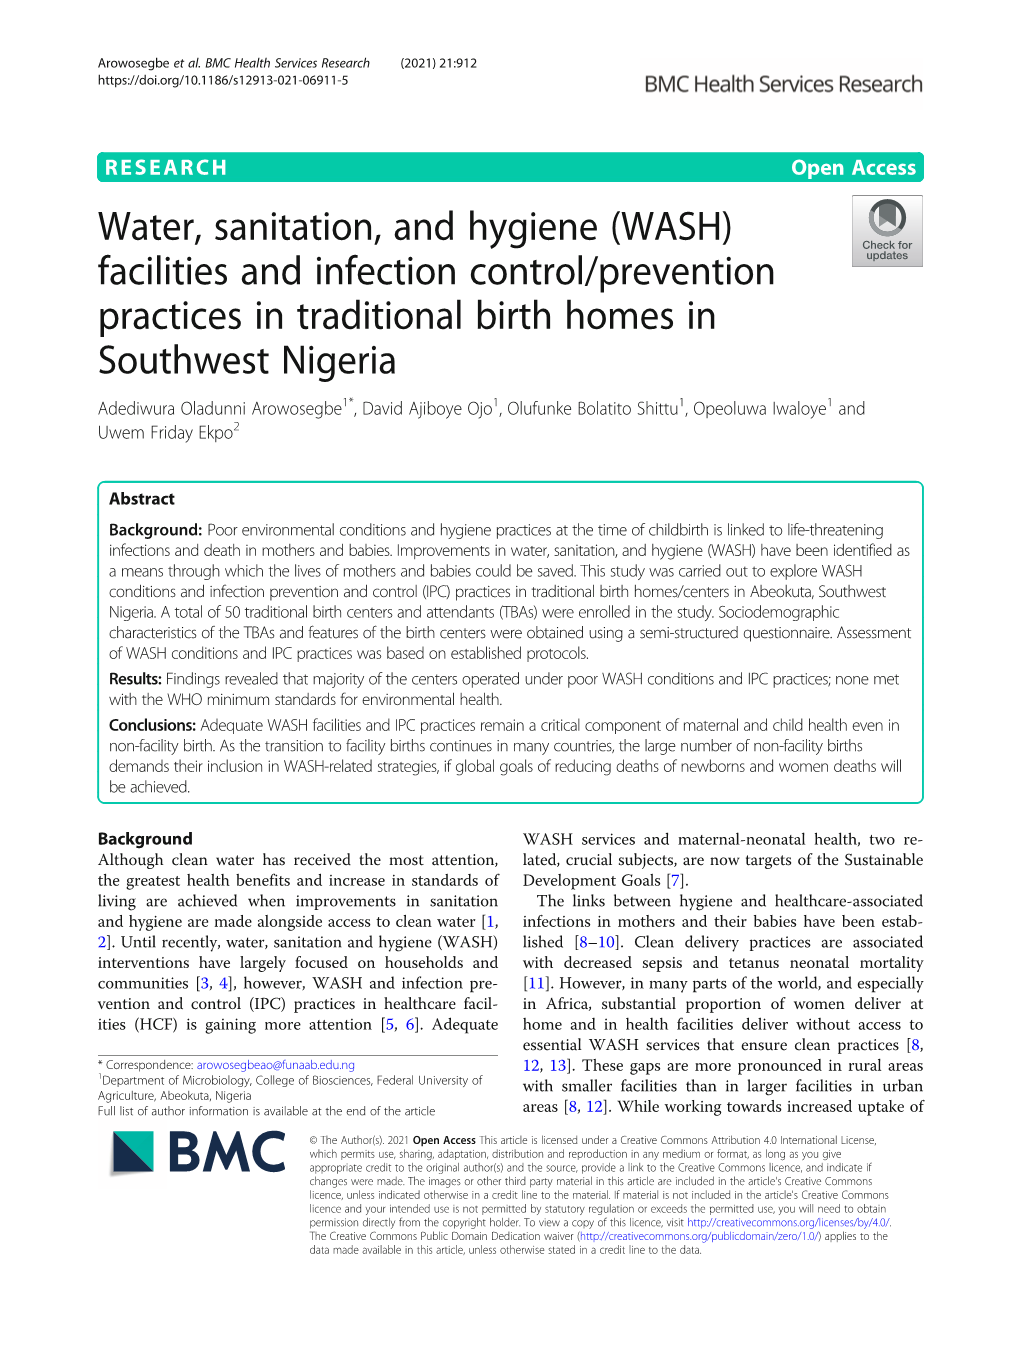 Water, Sanitation, and Hygiene (WASH) Facilities and Infection Control/Prevention Practices in Traditional Birth Homes in Southw